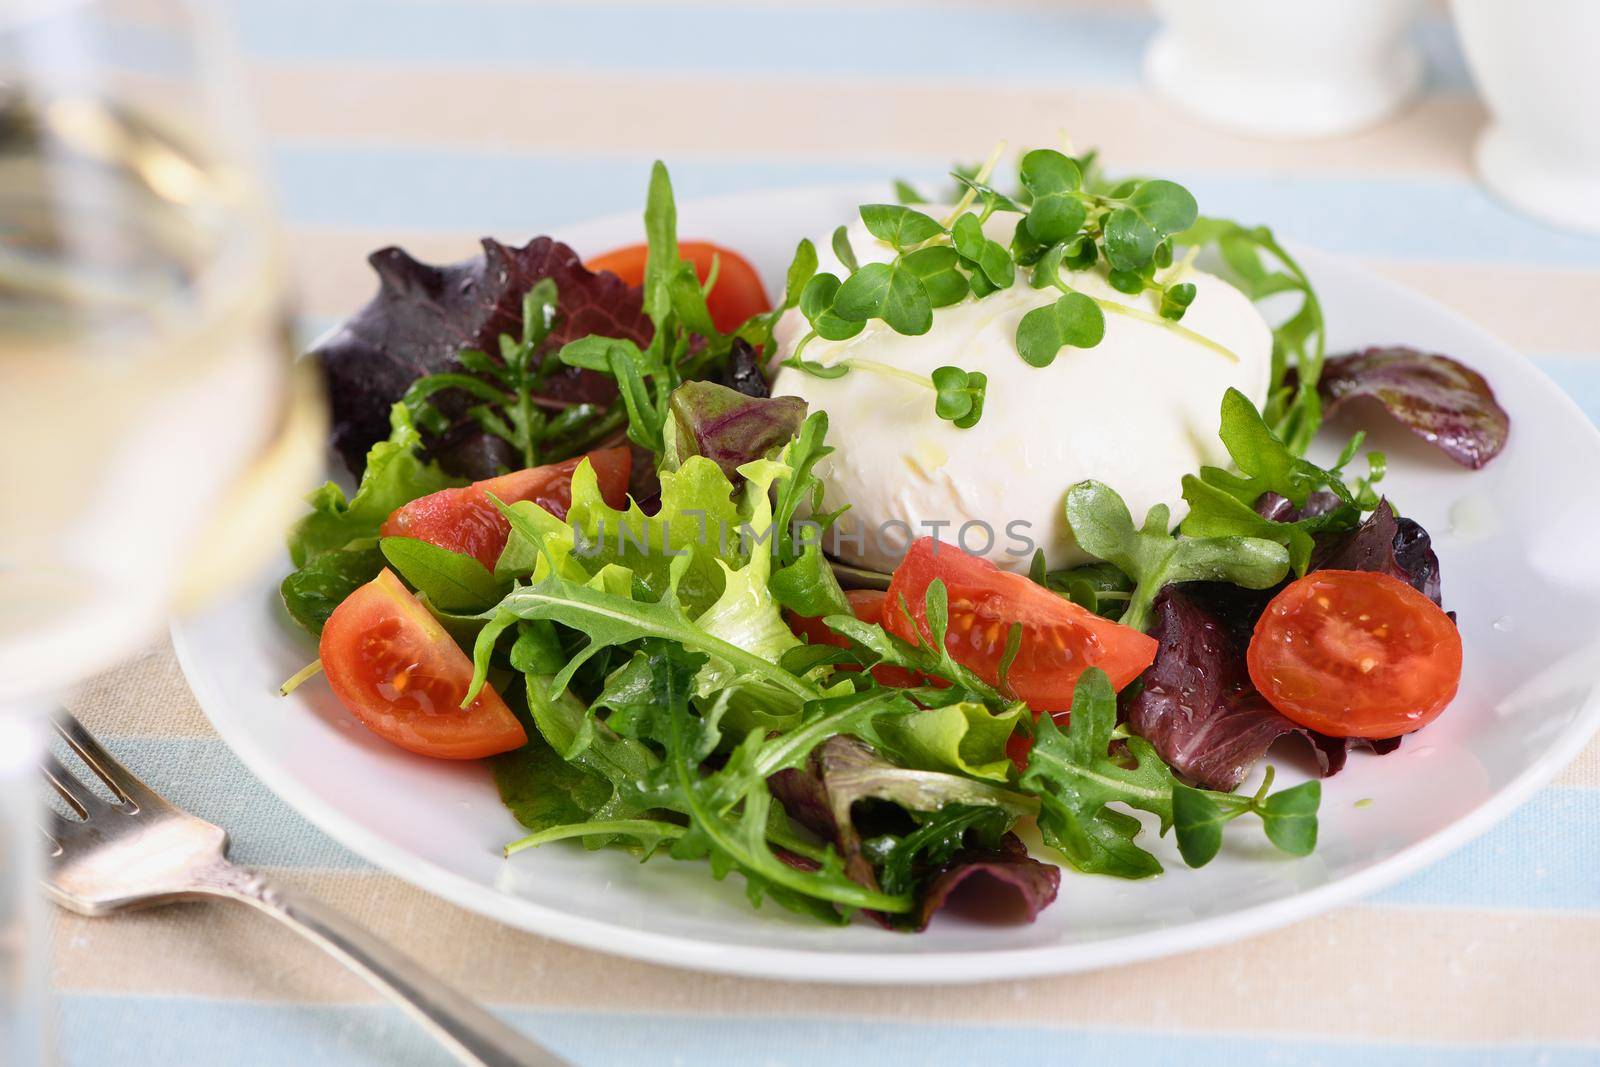   A healthy salad made from a lettuce leaves vegetables mix greens portion, arugula, tomatoes, radish sprouts and mozzarella cheese, olive oil, and a glass of white wine